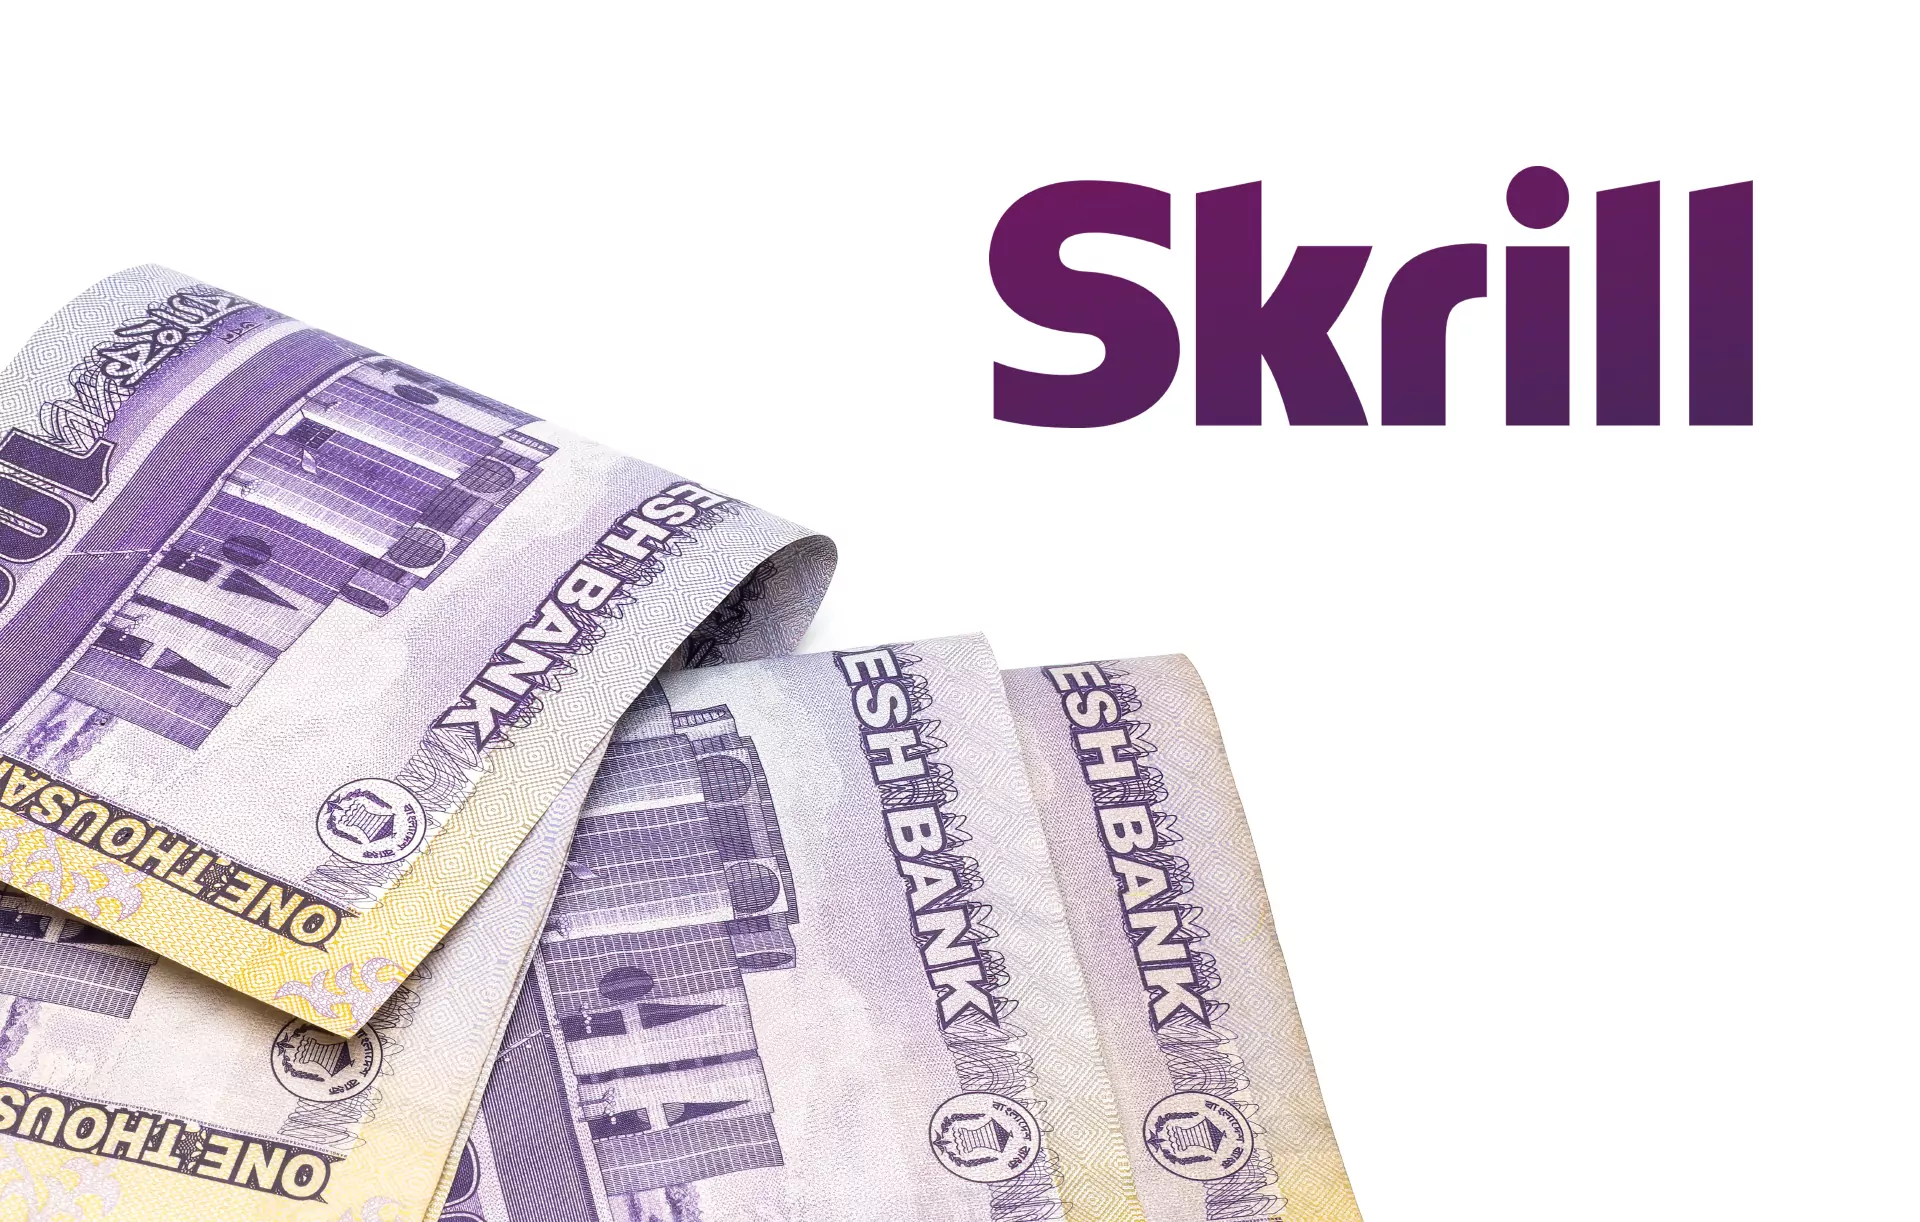 Skrill is an international payment system that allows users to open an e-wallet.